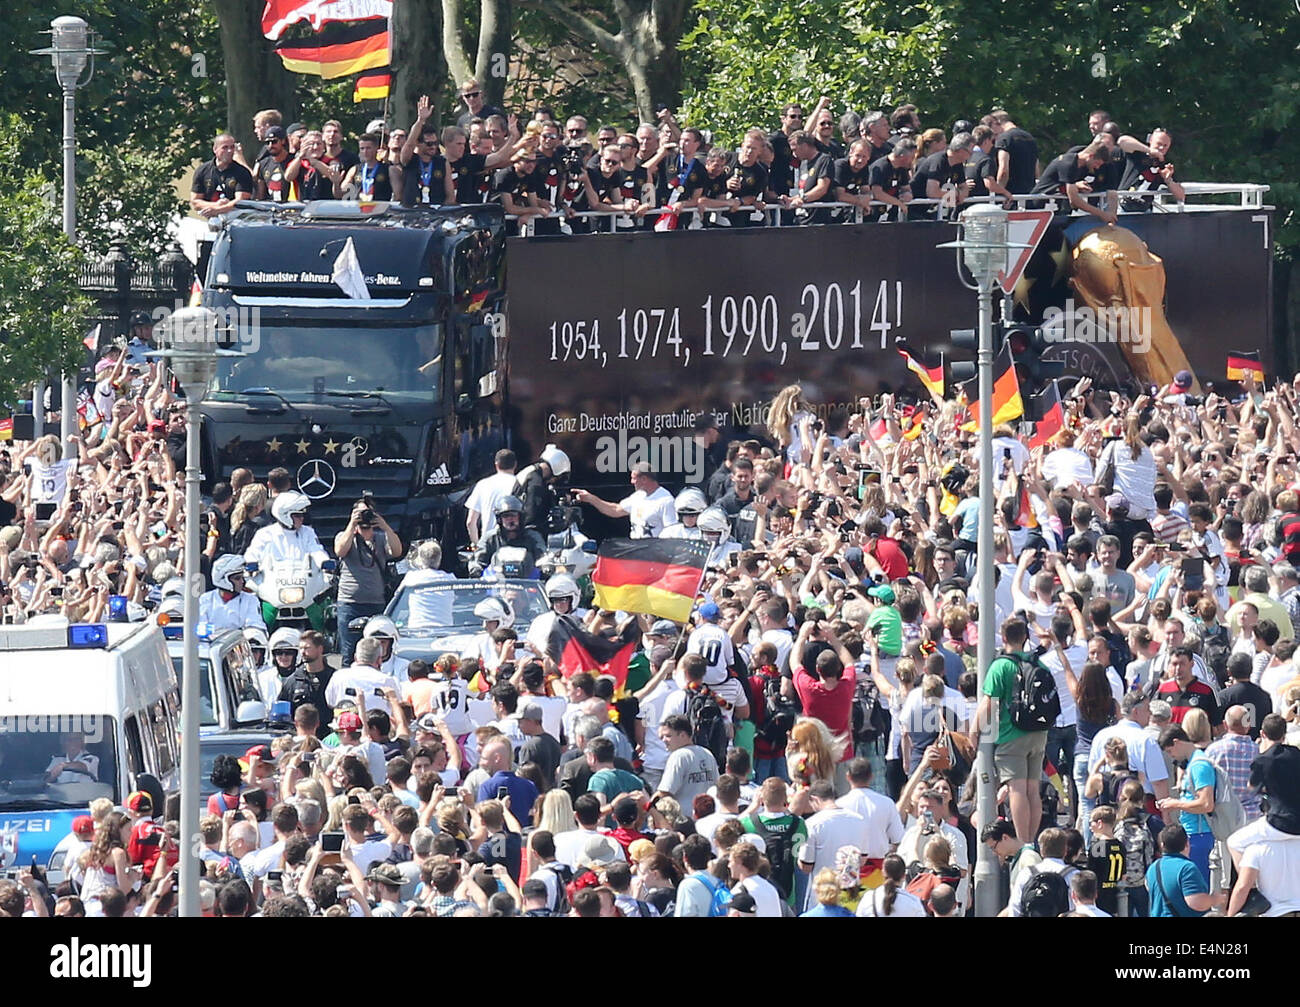 Berlin, Germany. 15th July, 2014. The German national soccer team is celebrated by fans during their drive to Brandenburg Gate in Berlin, Germany, 15 July 2014. The German team on 13 July 2014 had won the Brazil 2014 FIFA Soccer World Cup final against Argentina by 1-0 to win the title for the fourth time after 1954, 1974 and 1990. Photo: WOLFGANG KUMM/DPA/Alamy Live News Stock Photo